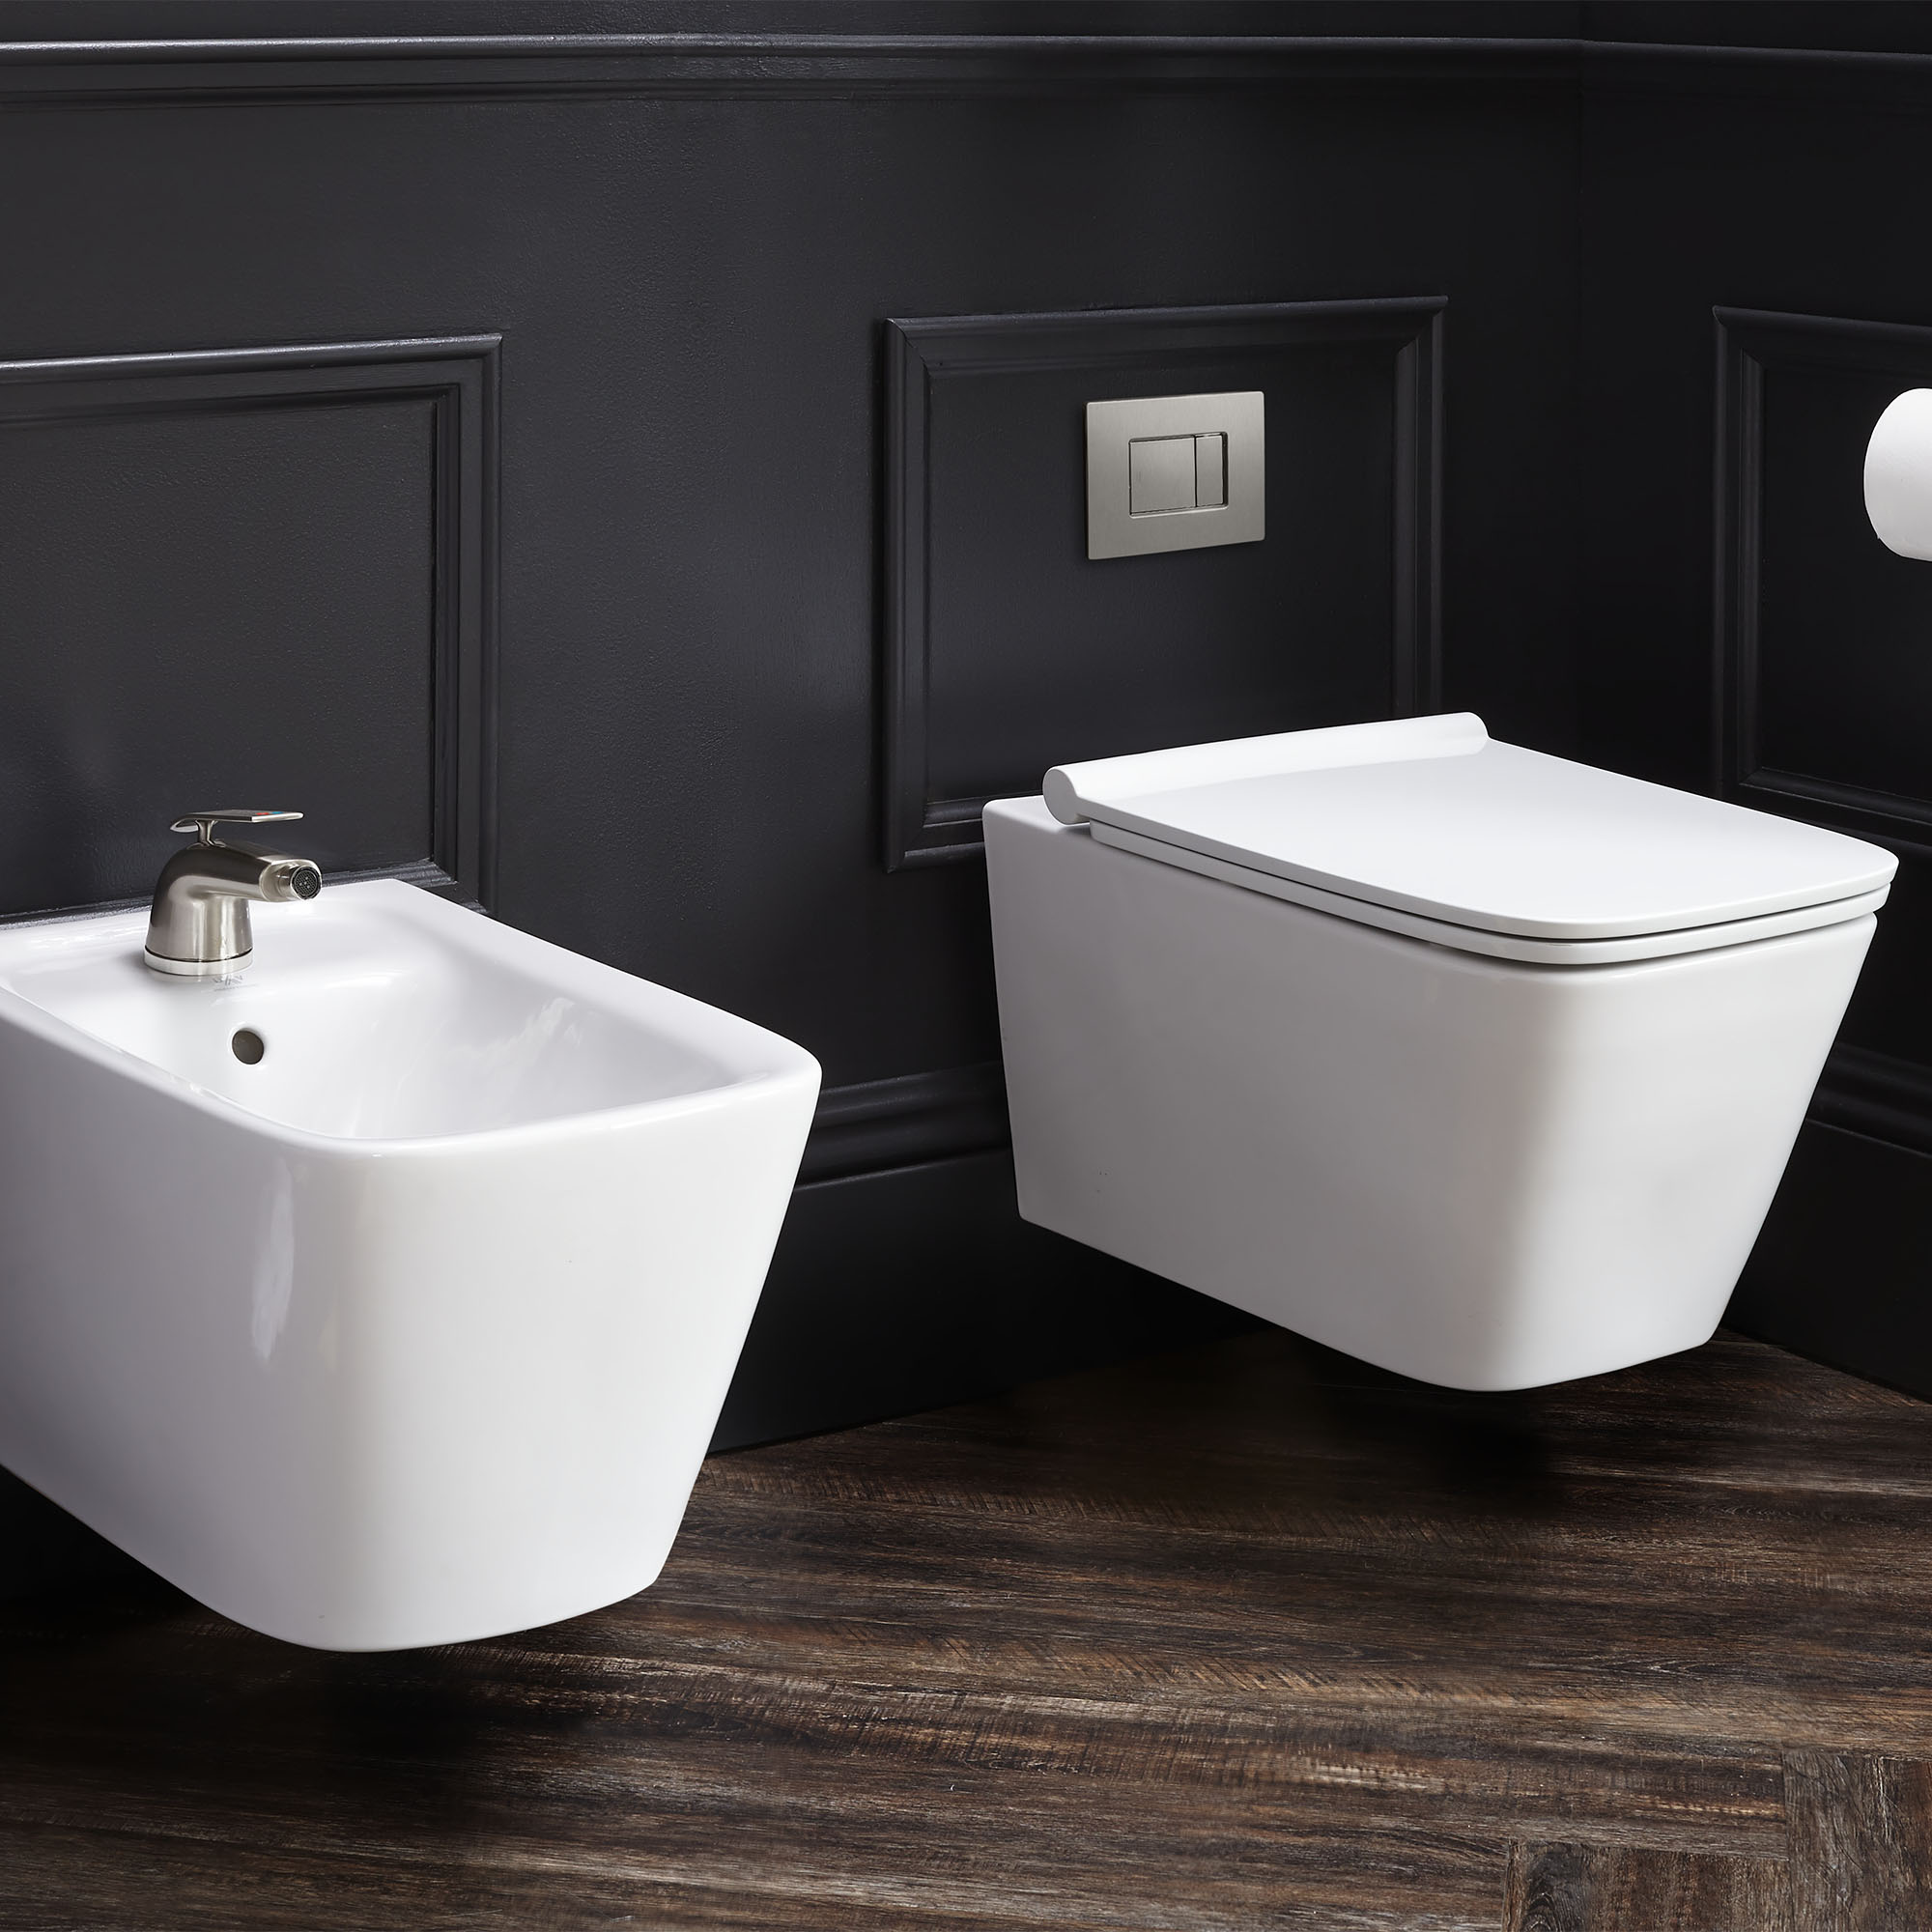 DXV Modulus Wall Hung Elongated Toilet Bowl with Seat